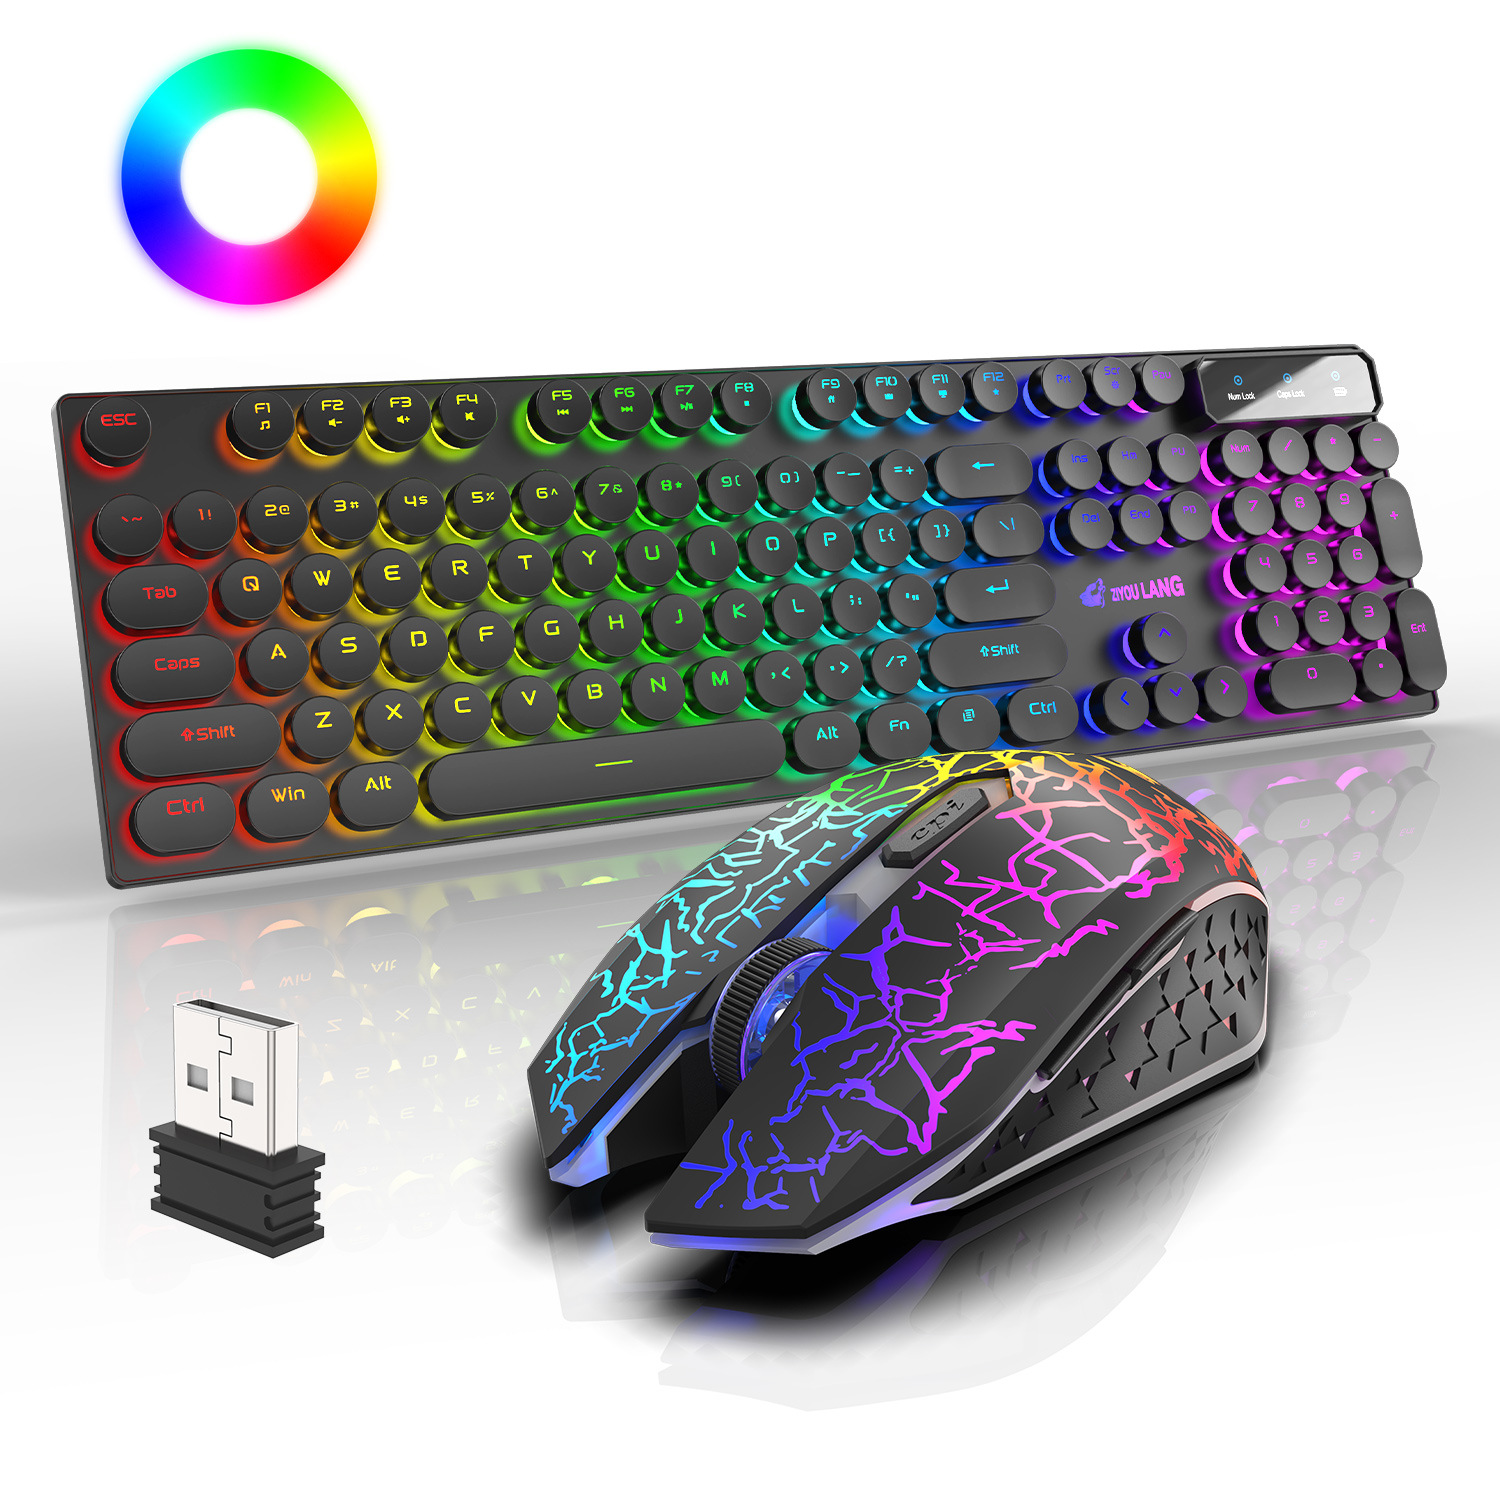 Free Wolf T3 Wireless Rechargeable Keyboard and Mouse Set Game Glow Keyboard and Mouse Set Cross Border eBay Amazon